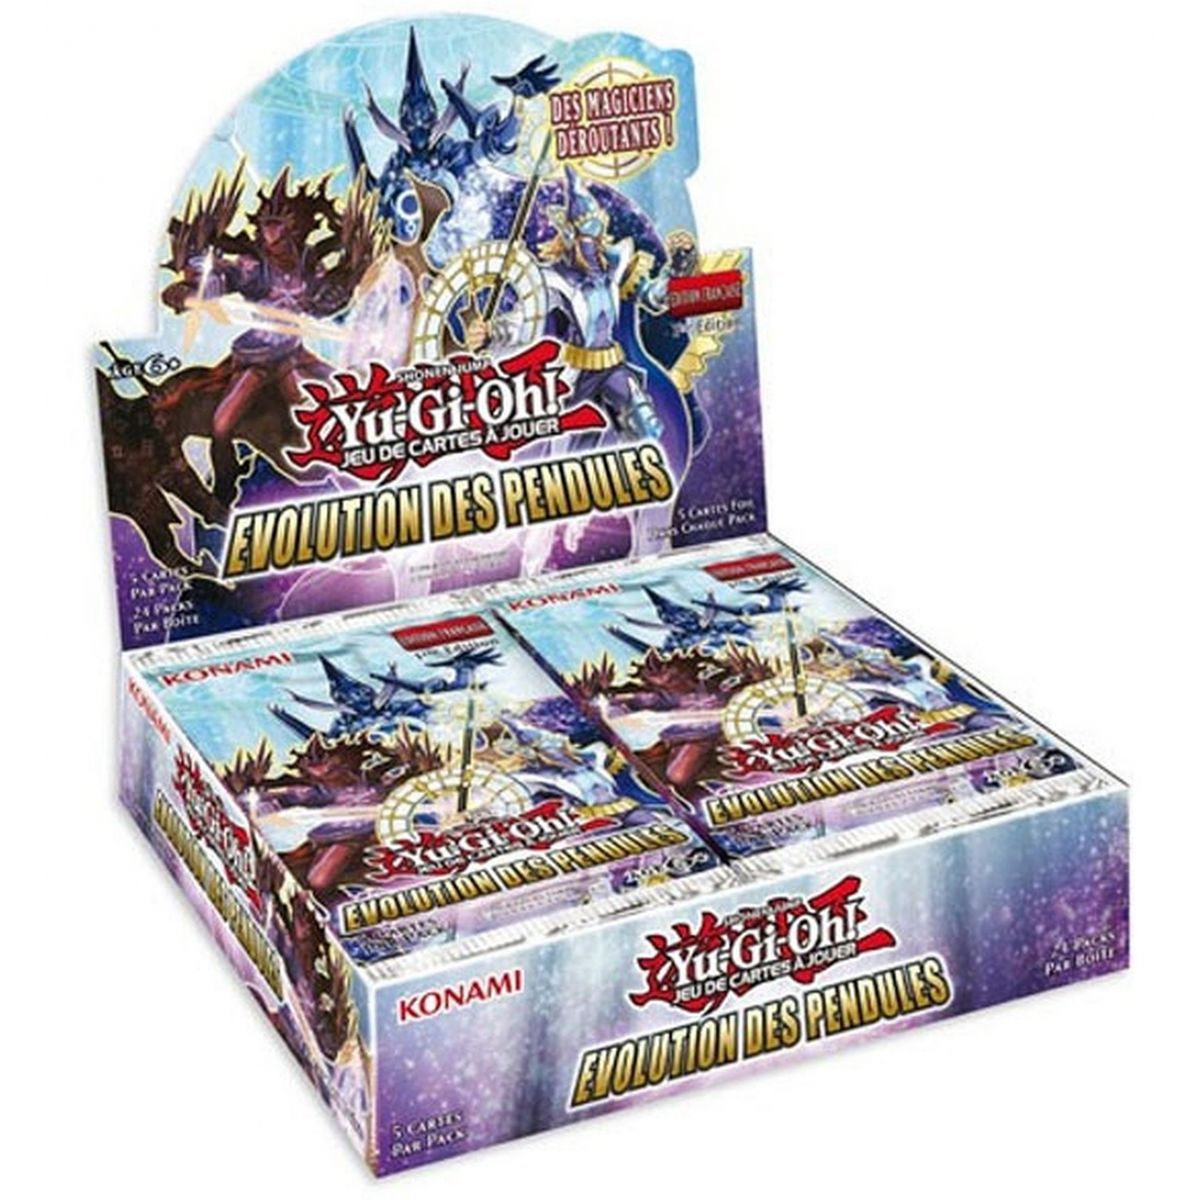 Yu Gi Oh! - Display - Box of 24 Boosters - Evolution of Pendulums - FR